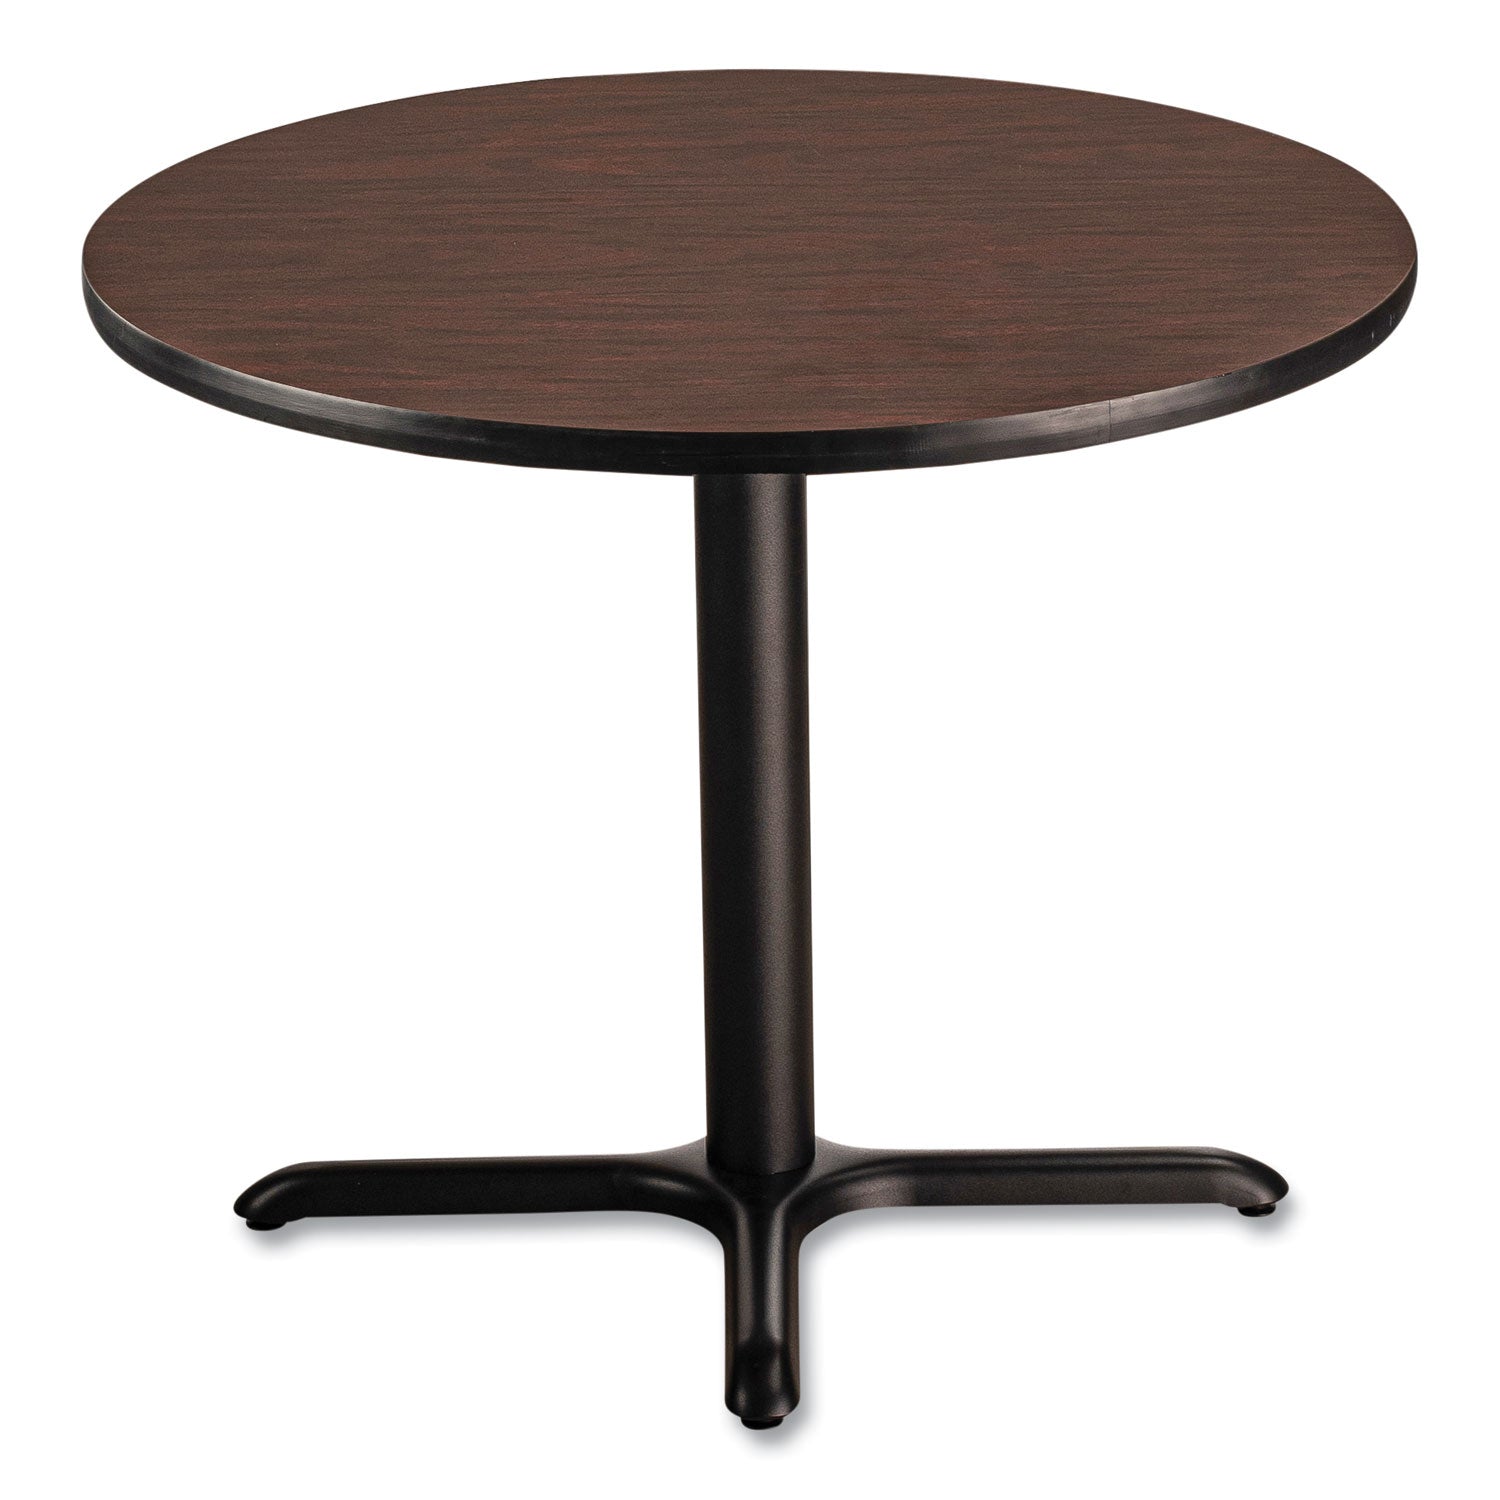 cafe-table-36-diameter-x-30h-round-top-x-base-mahogany-top-black-base-ships-in-7-10-business-days_npsct13636xd1my - 2